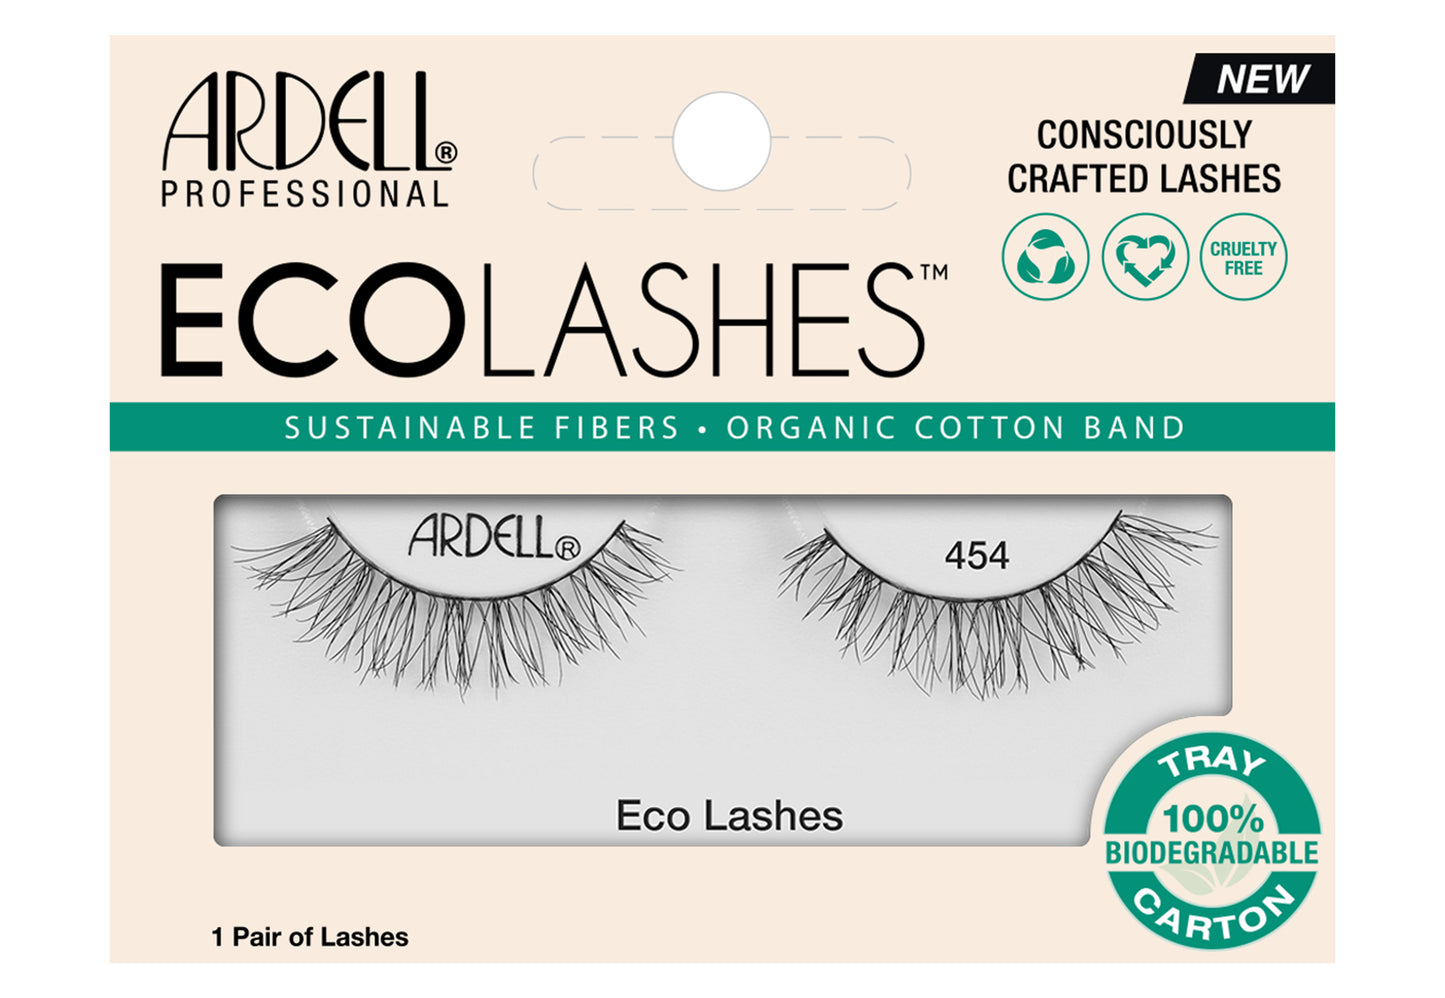 Frontview of a wall-hook ready retail pack of Ardell's Ecolashes 454 with printed text